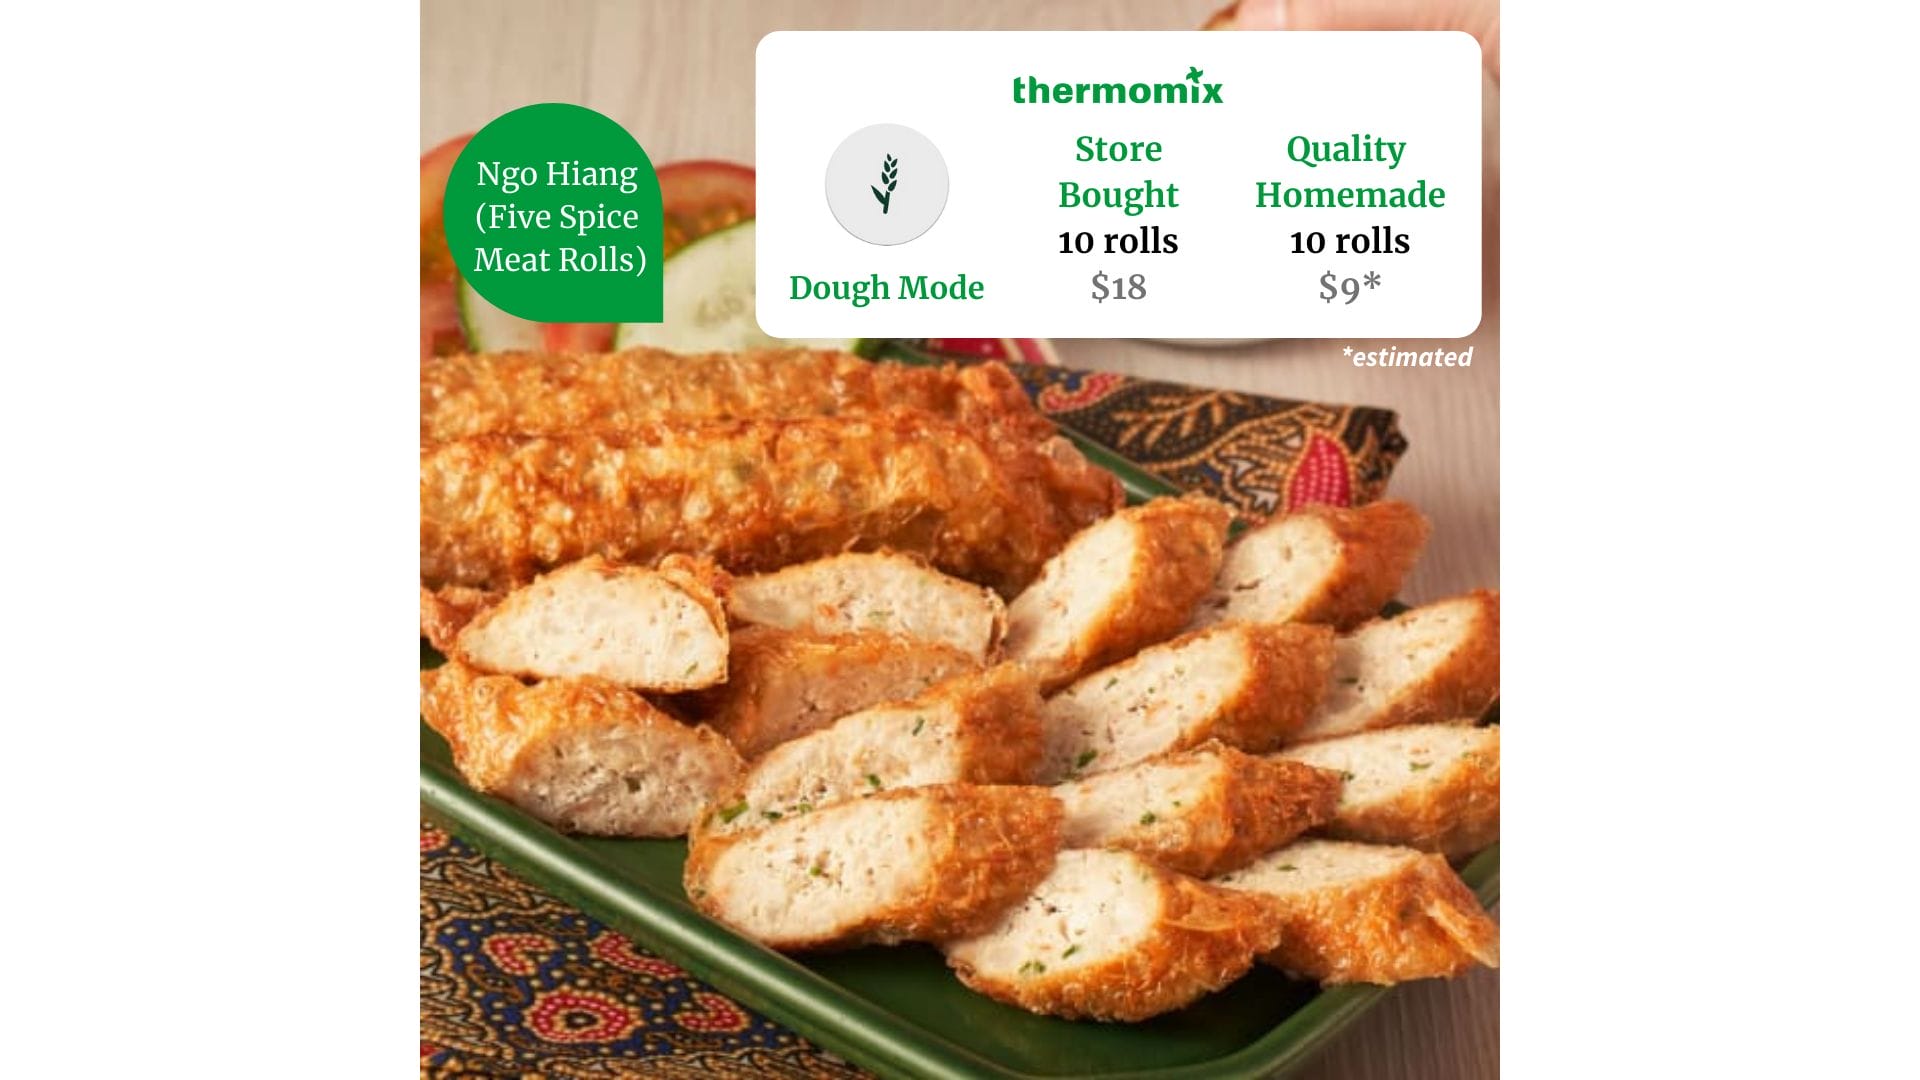 Ngo hiang (five spice meat rolls) / Thermomix® Chinese New Year E-Book & Cookidoo®